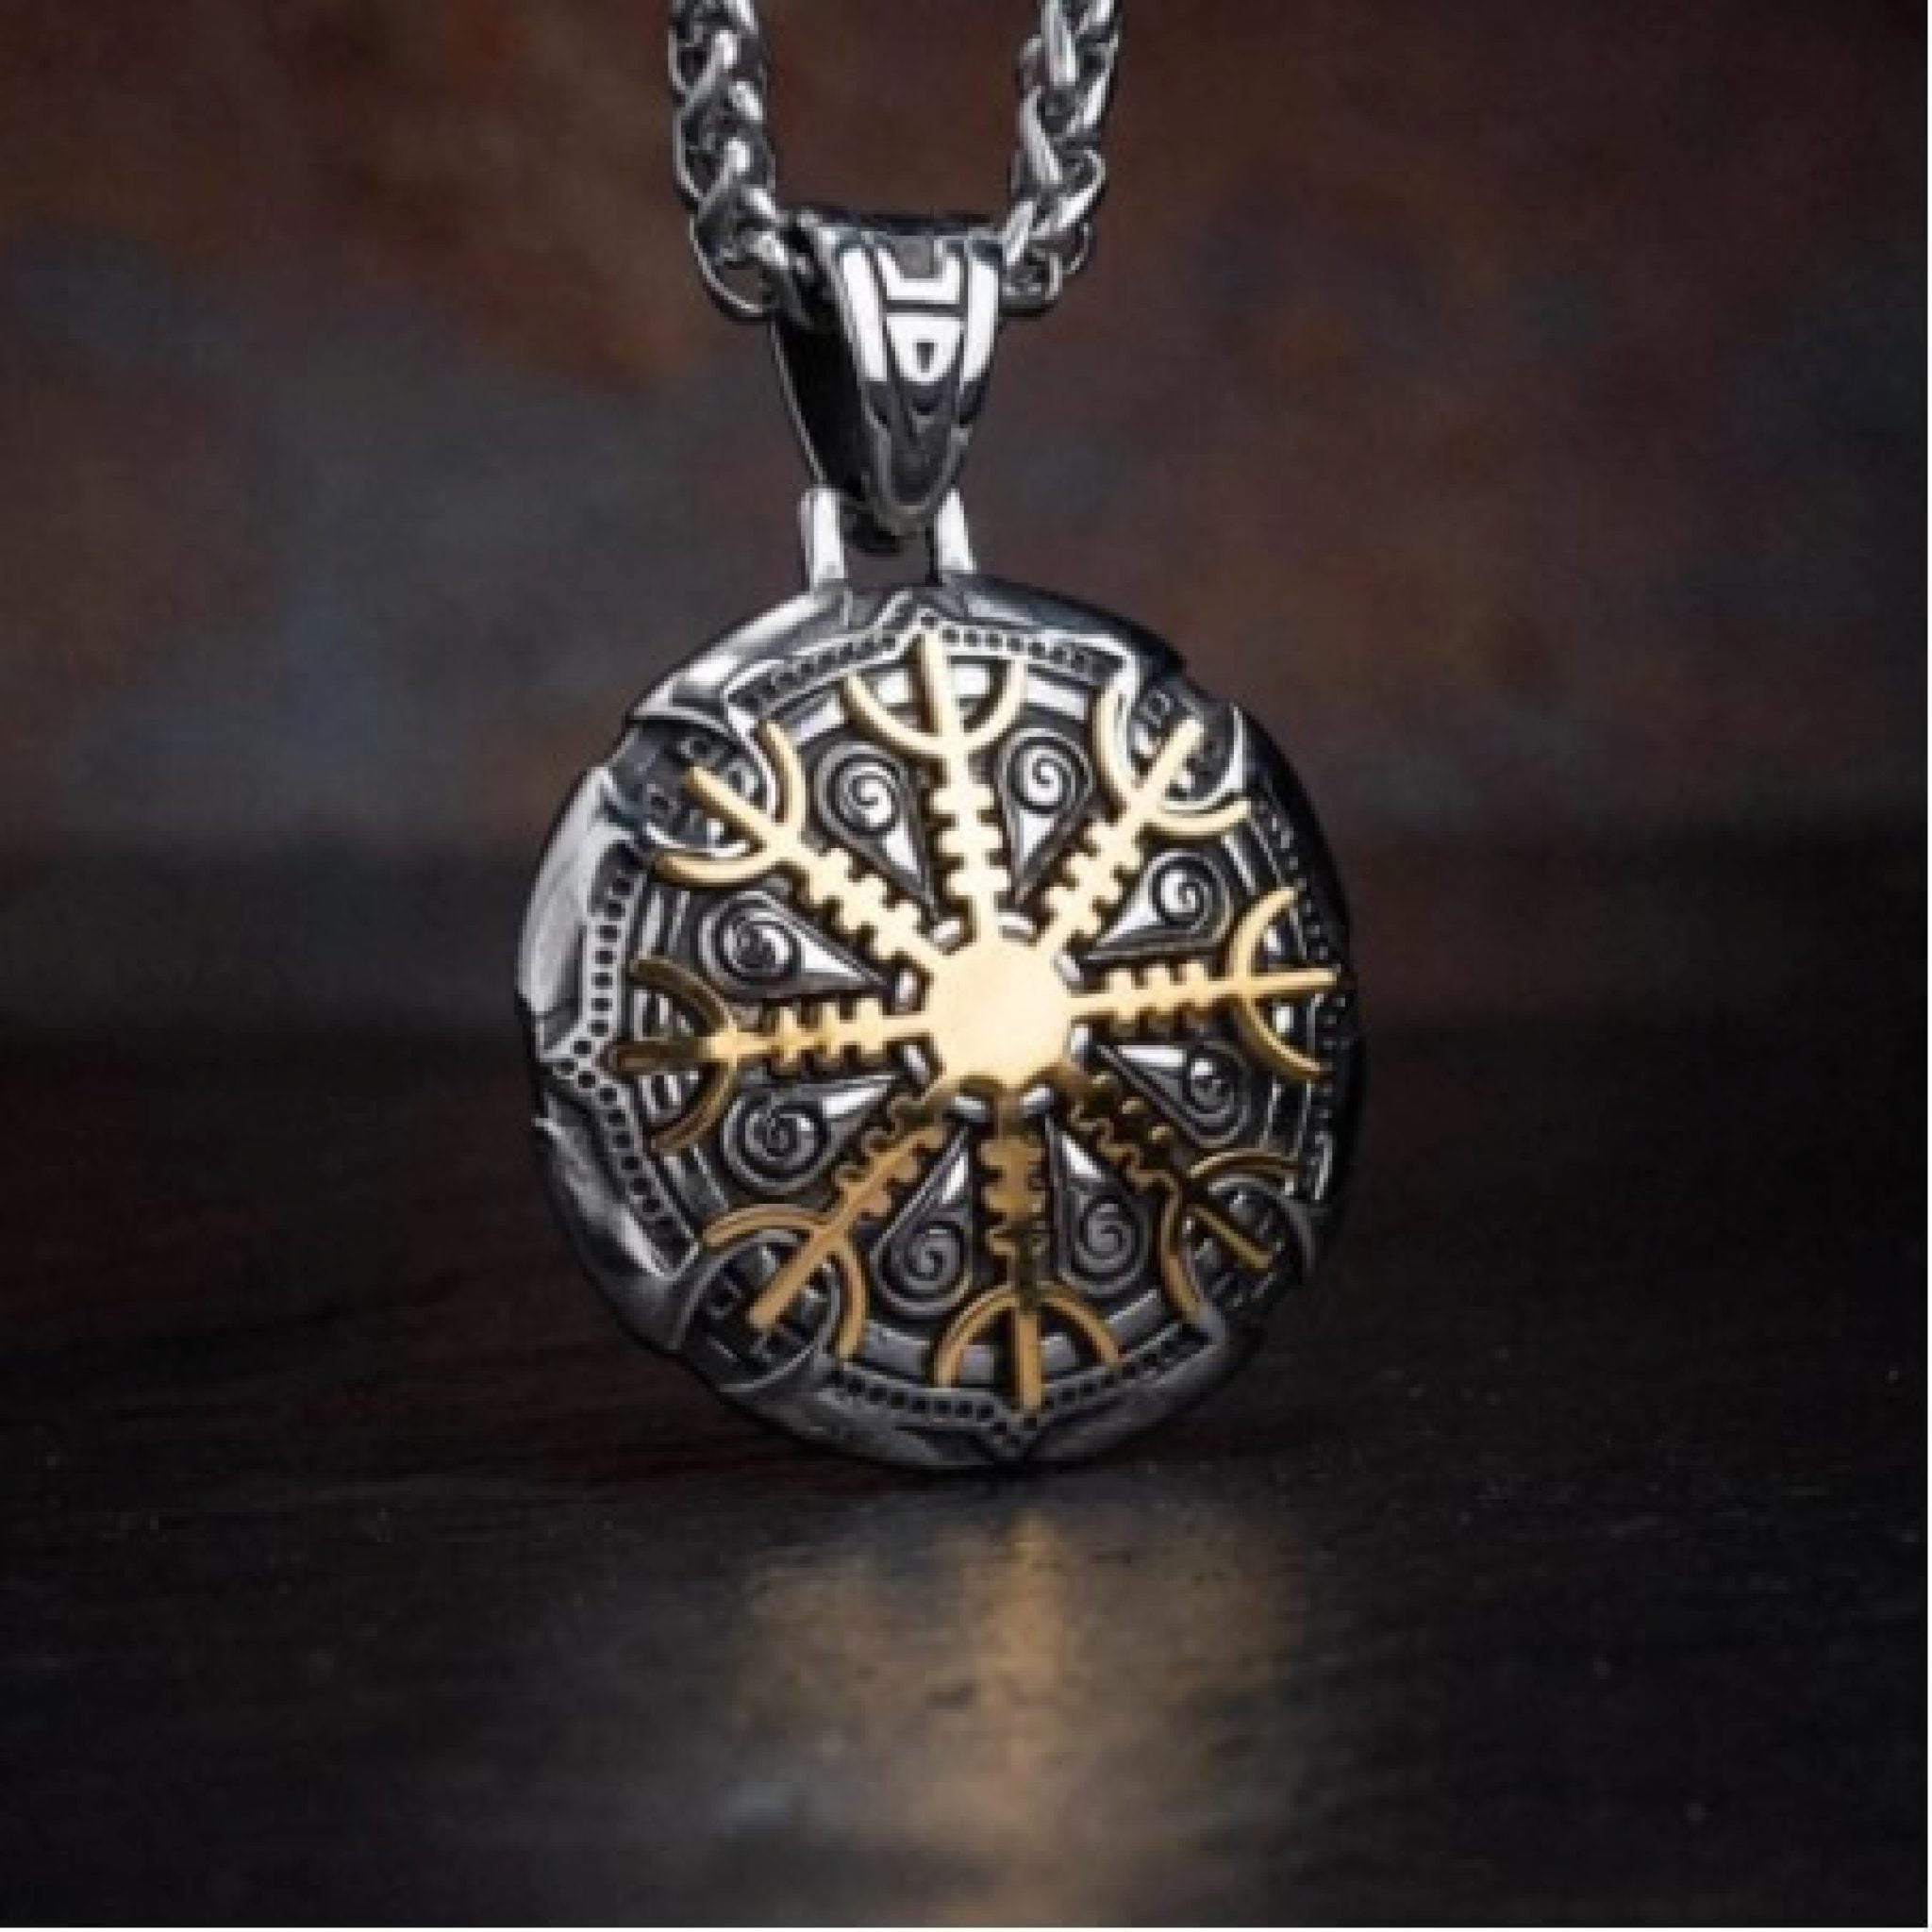 Stainless-Steel-Nordic-Viking-Compass-Pendant-Necklace2-2048x2048.jpg